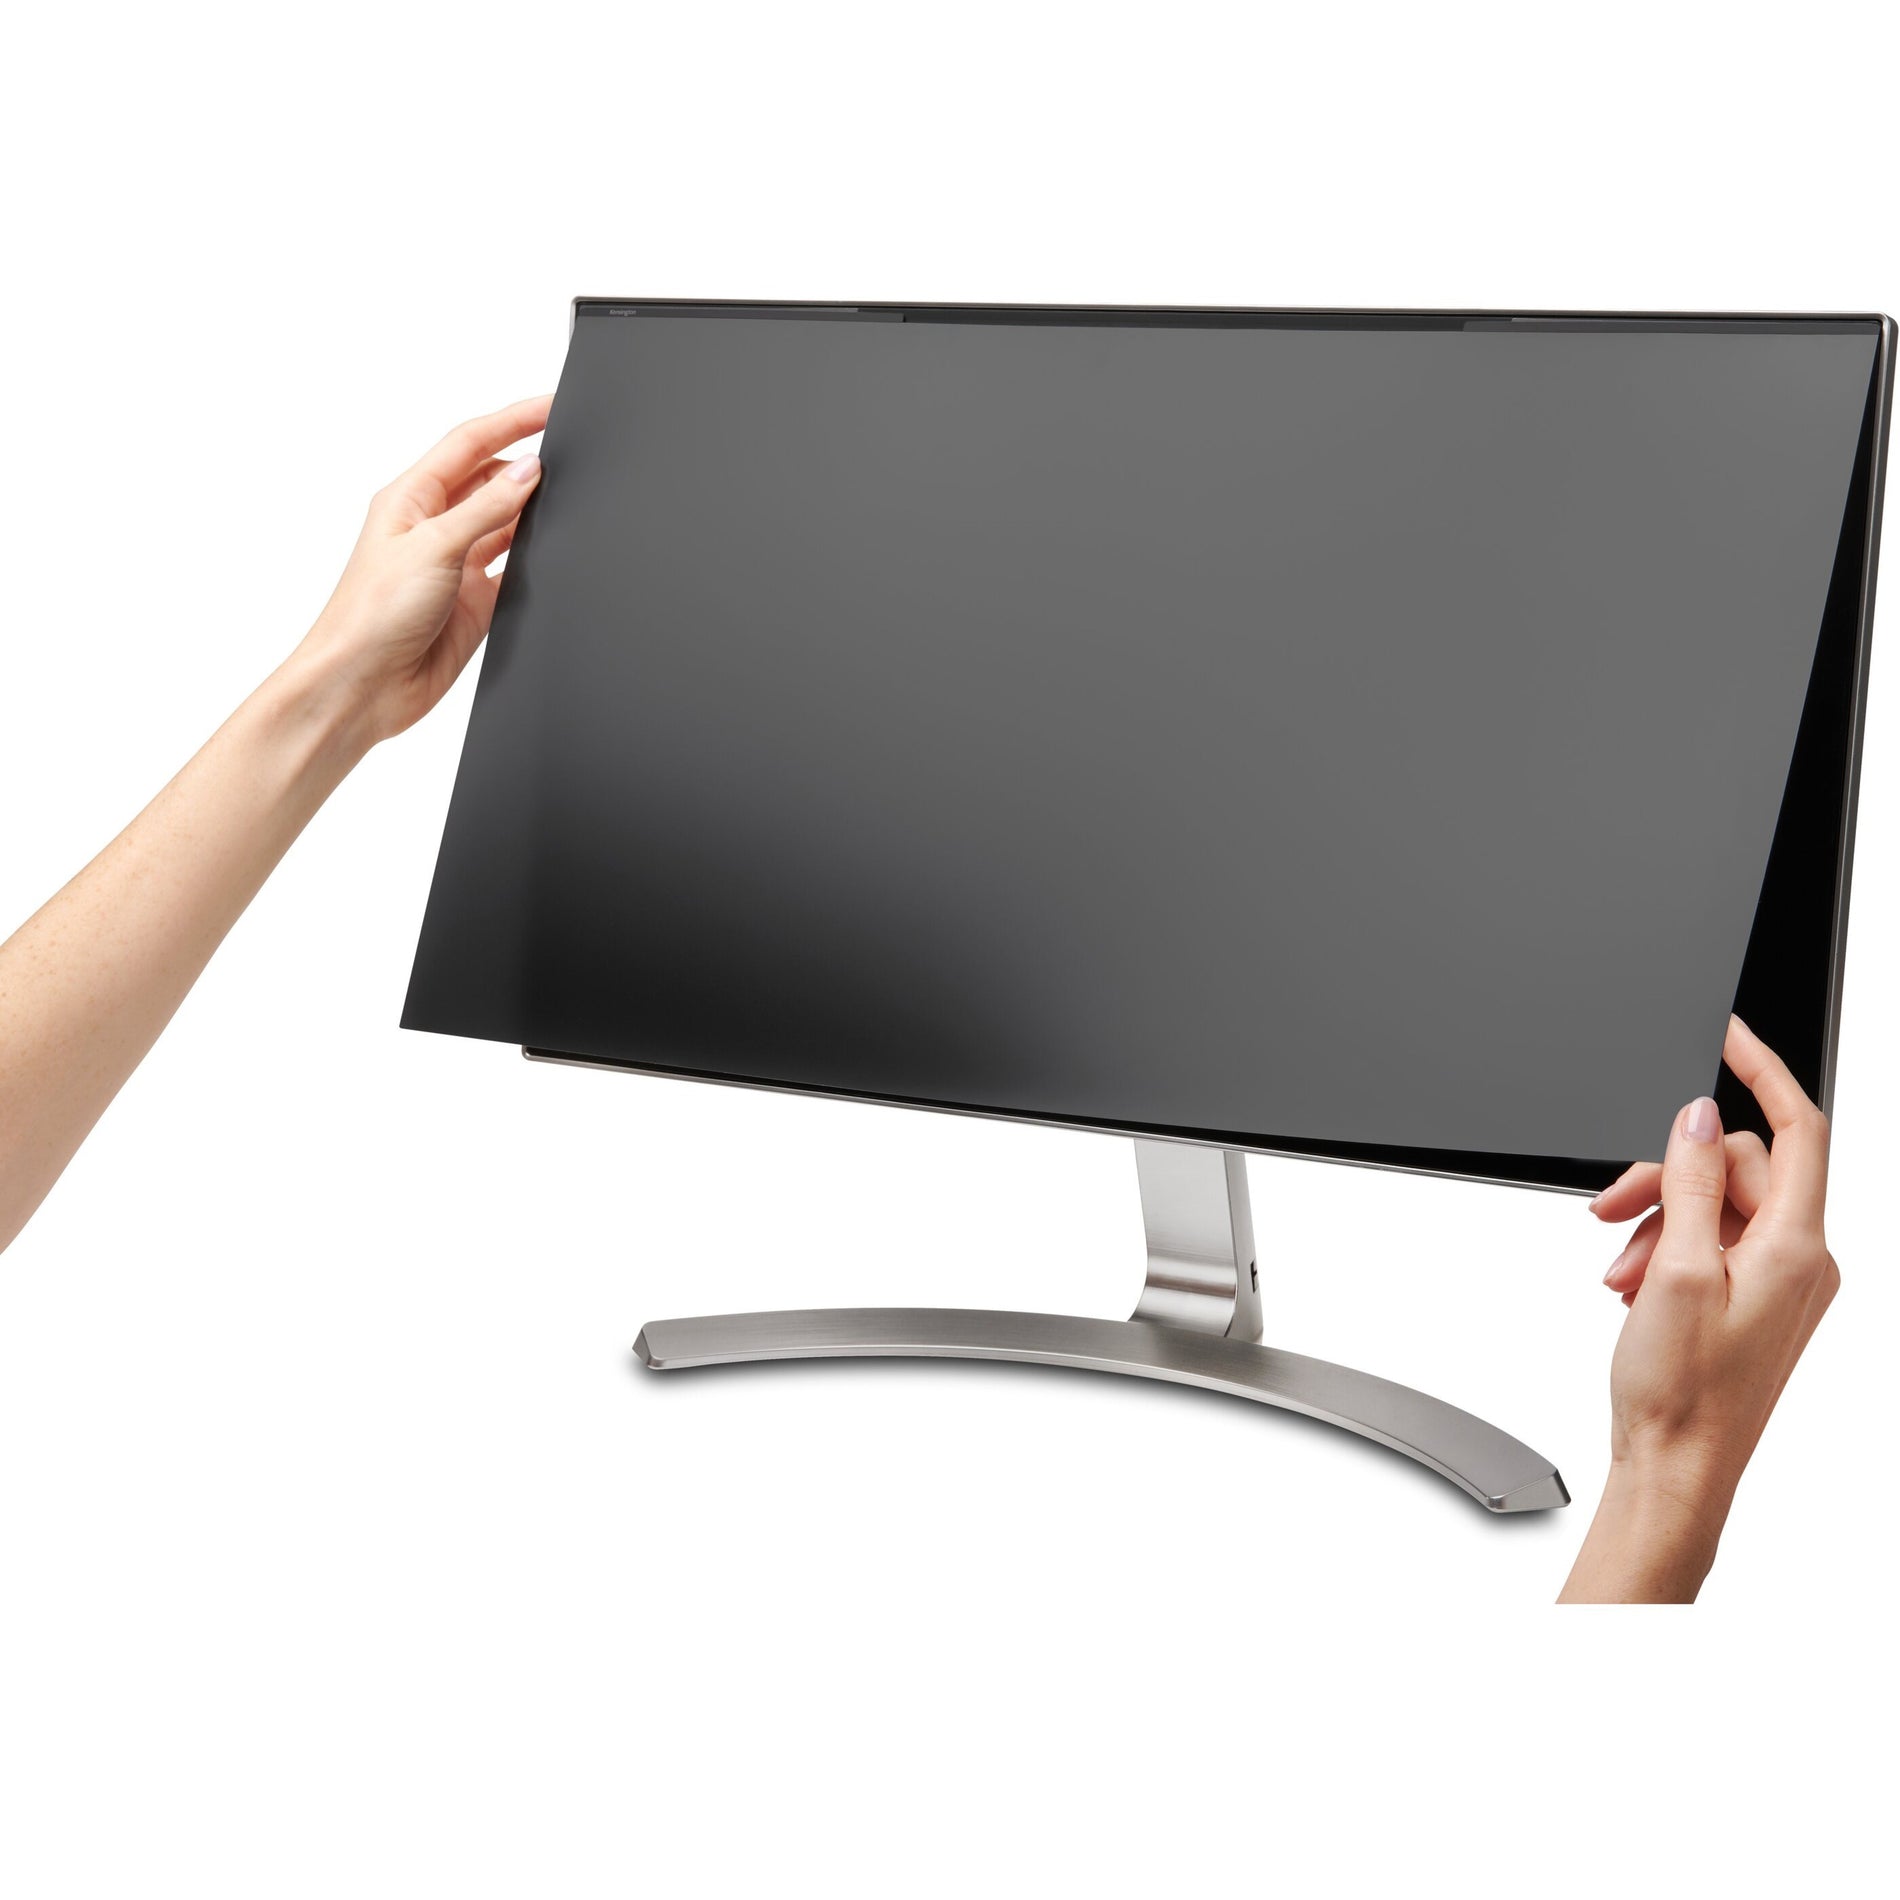 Kensington MagPro 24.0" (16:9) Monitor Privacy Screen with Magnetic Strip (K58357WW) Alternate-Image2 image